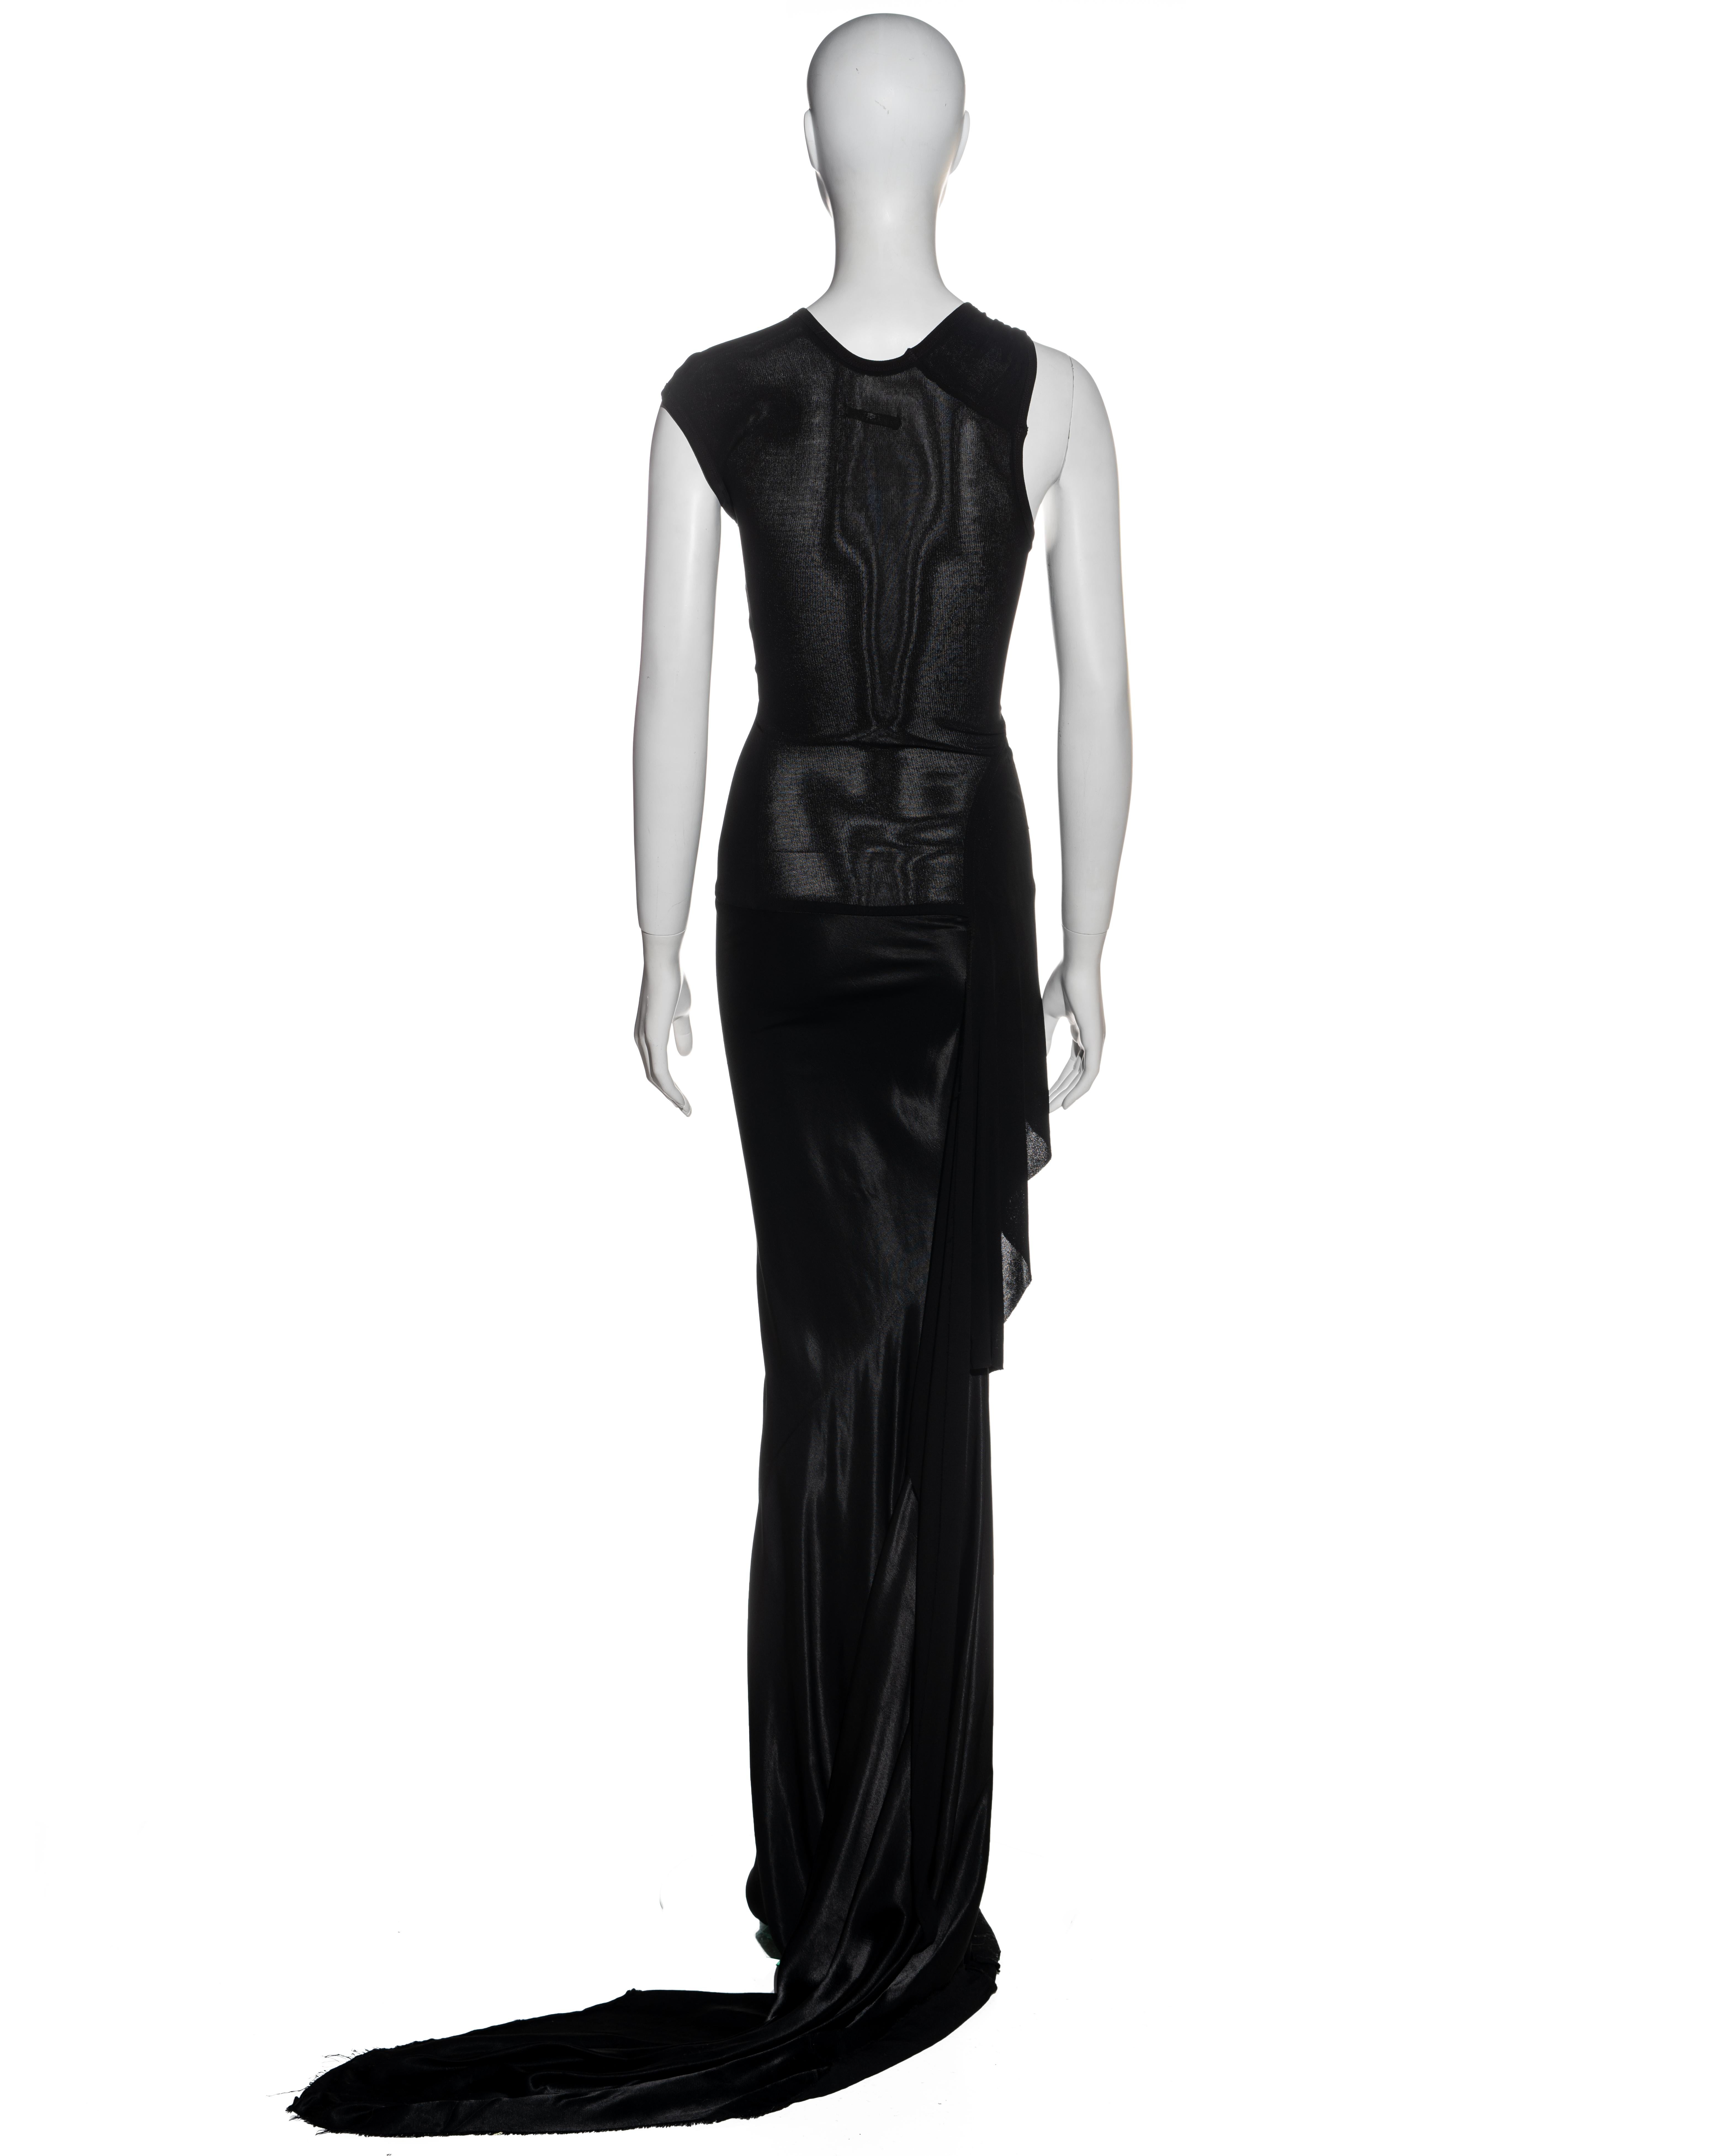 Women's Rick Owens early black silk deconstructed trained evening dress, c. 1995 - 1997 For Sale